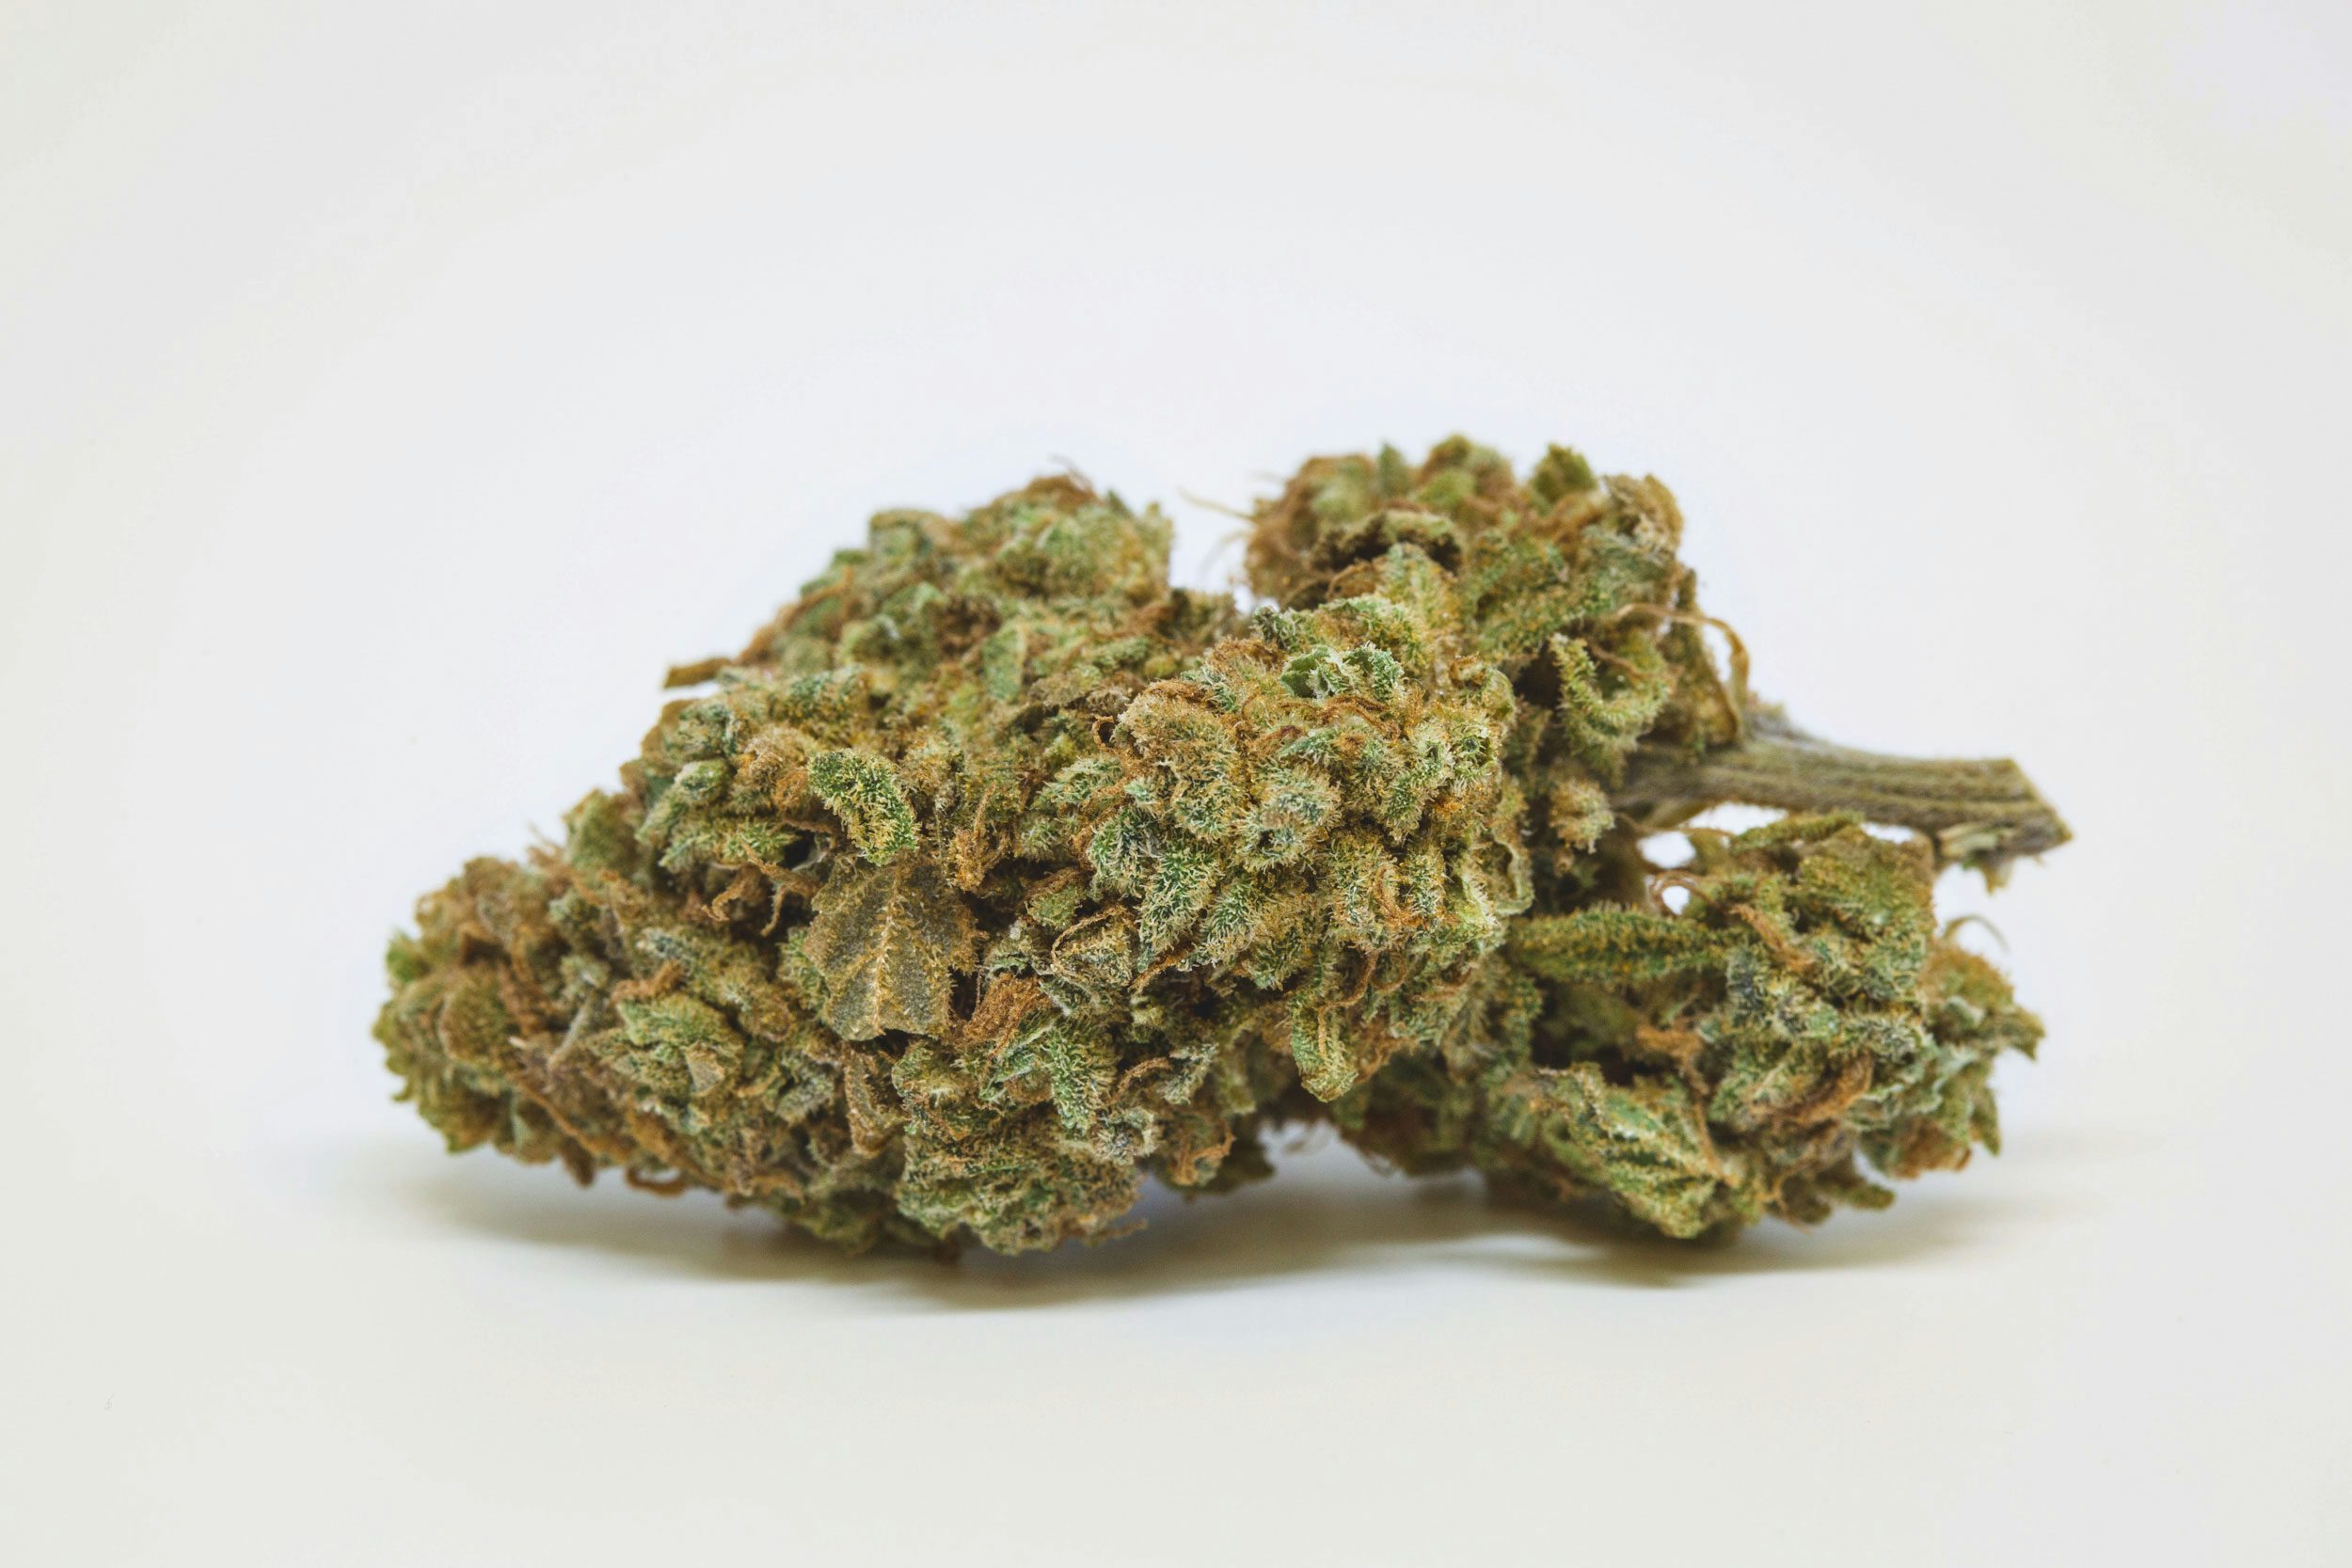 5Best Star Wars Strains To Take You To A Galaxy Far Far Away Best Star Wars Strains To Take You To A Galaxy Far, Far Away